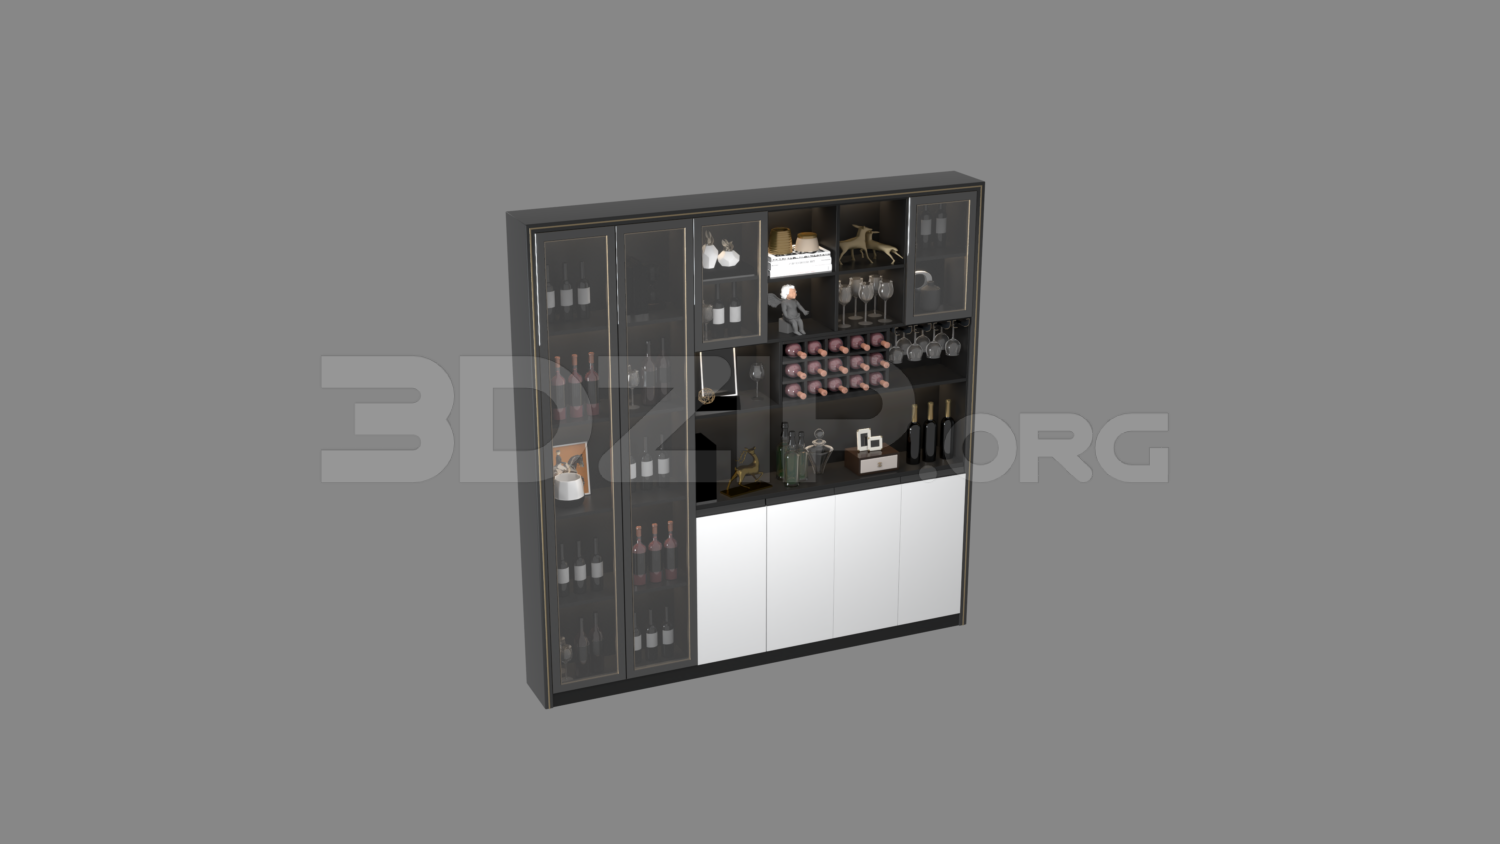 2568. Download Free Wine Cabinet Model By Huy Hieu Lee